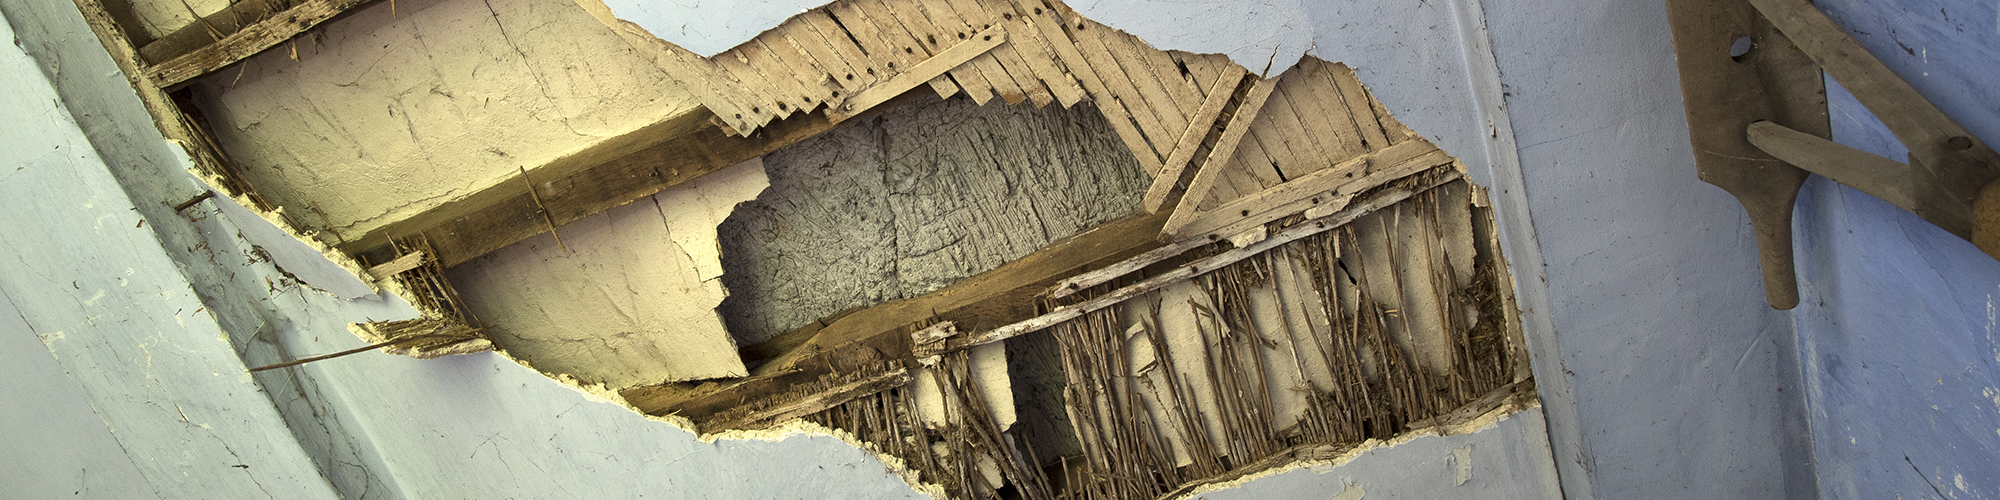 A partially collapsed ceiling revealing traditional lath and wattle under the plaster. SAM Conveyancing describe how to detect potential problems and prevent Lath and Plaster Ceiling Collapse